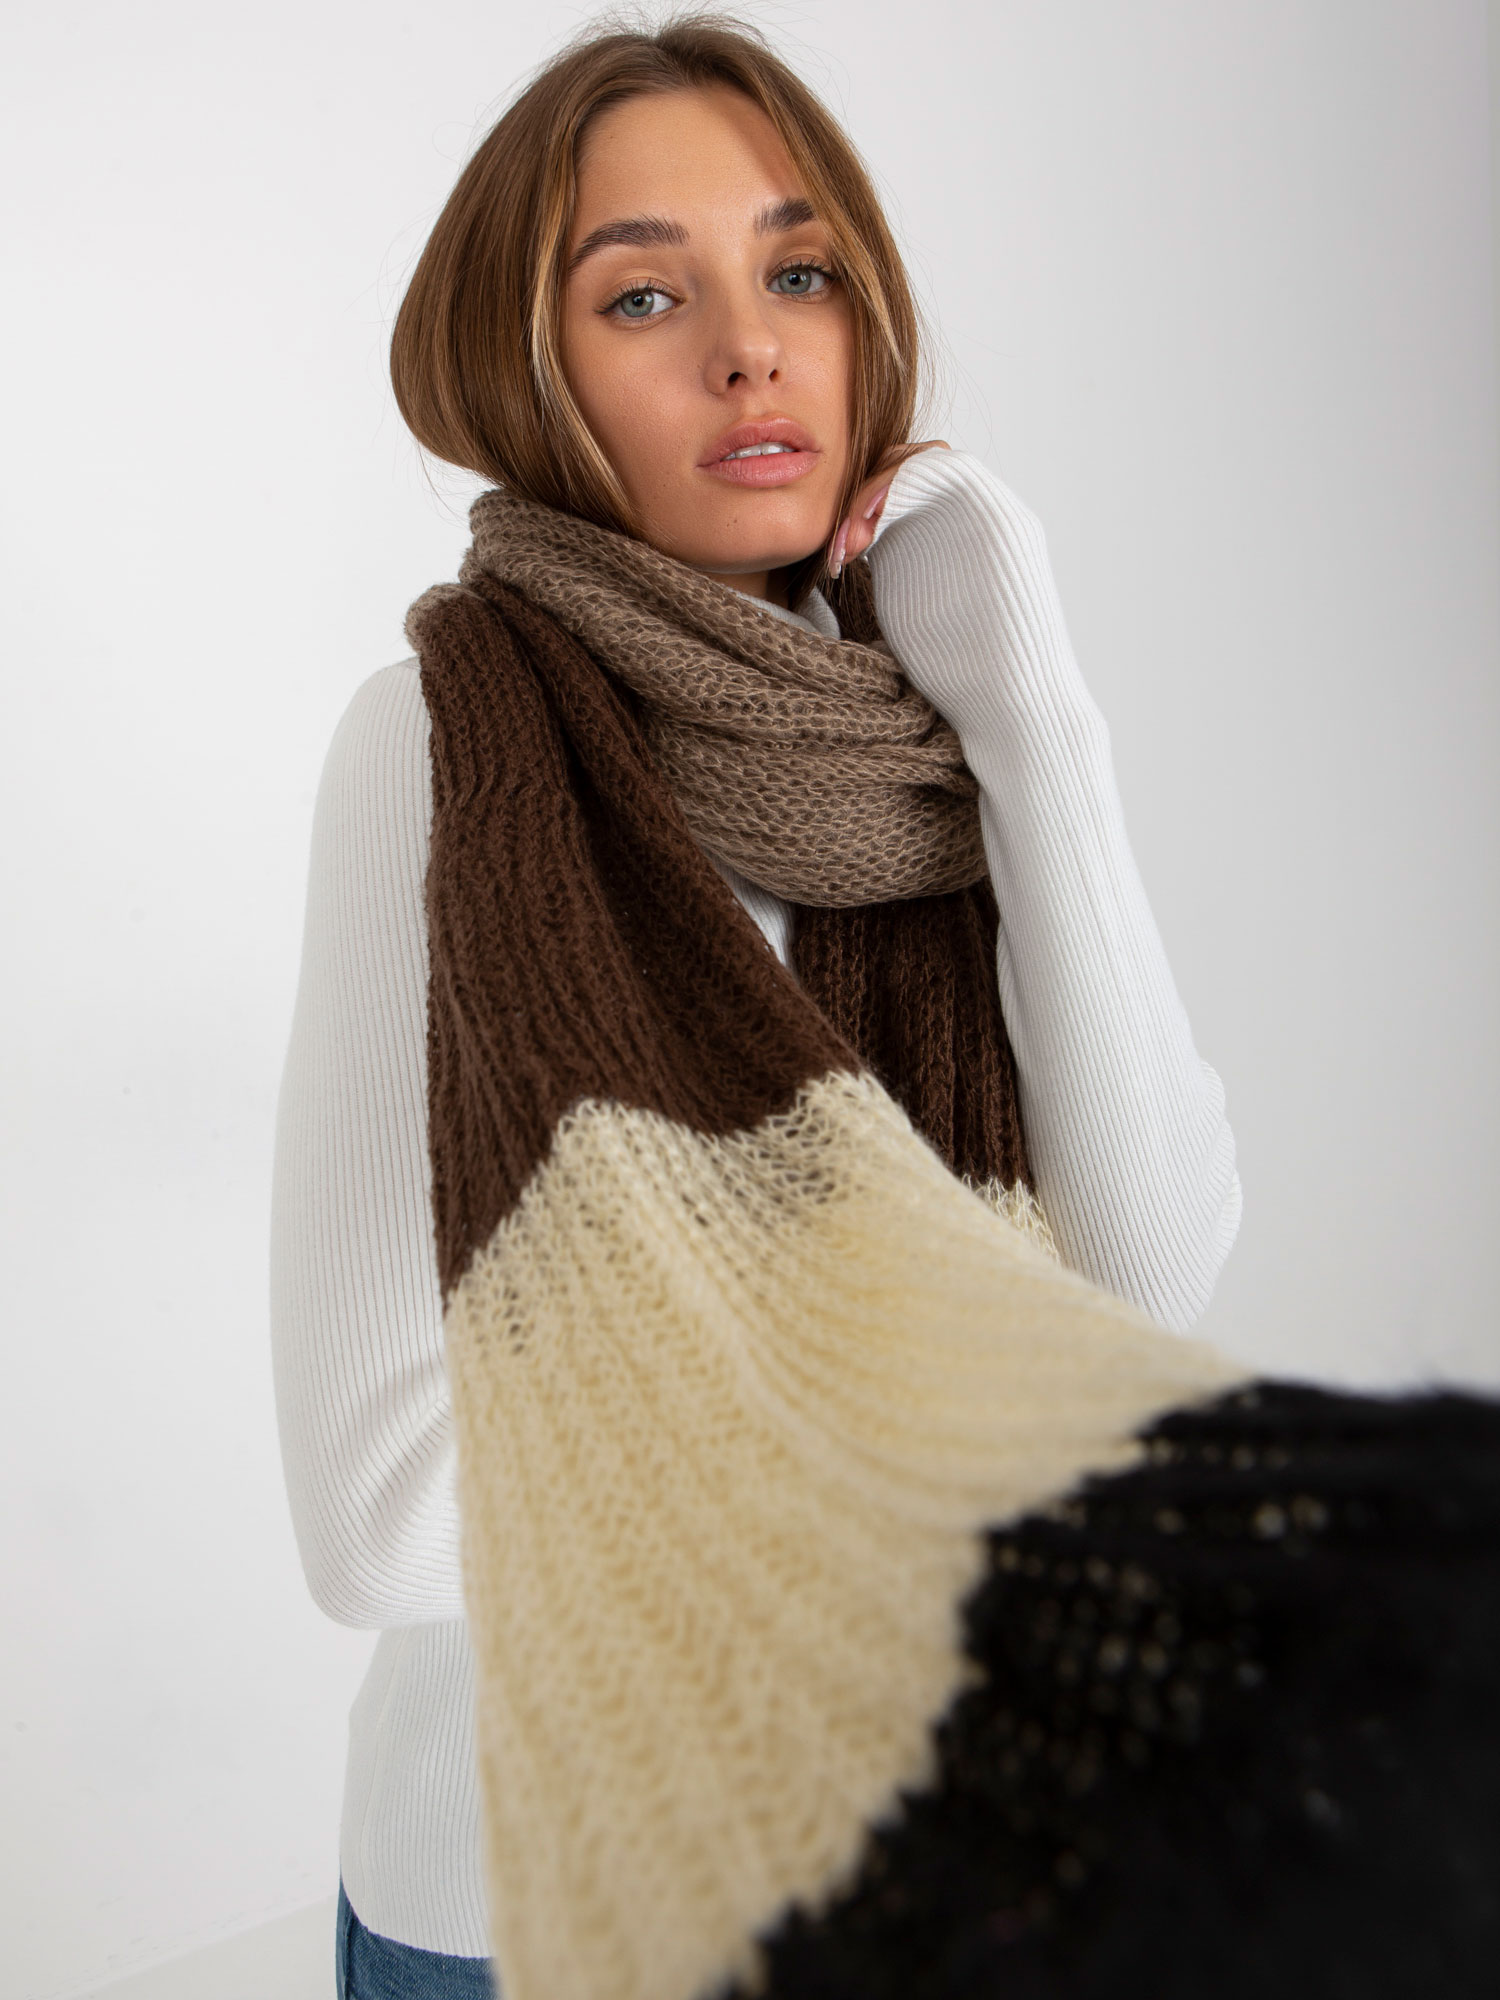 Women's black-brown knitted winter scarf